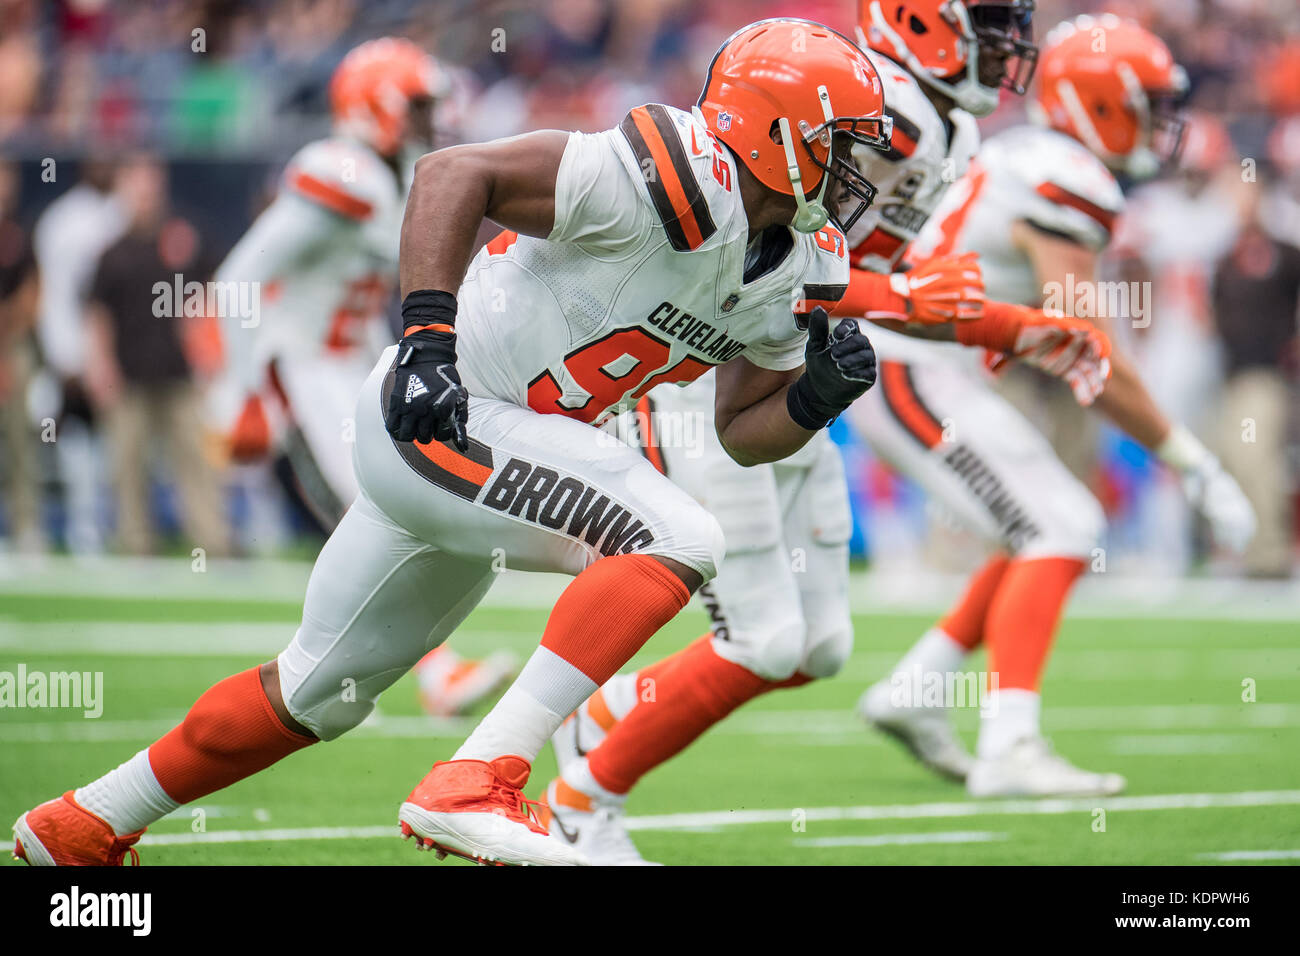 Houston, TX, USA. 15th Oct, 2017. Cleveland Browns defensive end Myles Garrett (95) heads toward the opposing quarterback during the 4th quarter of an NFL football game between the Houston Texans and the Cleveland Browns at NRG Stadium in Houston, TX. The Texans won 33-17.Trask Smith/CSM/Alamy Live News Stock Photo